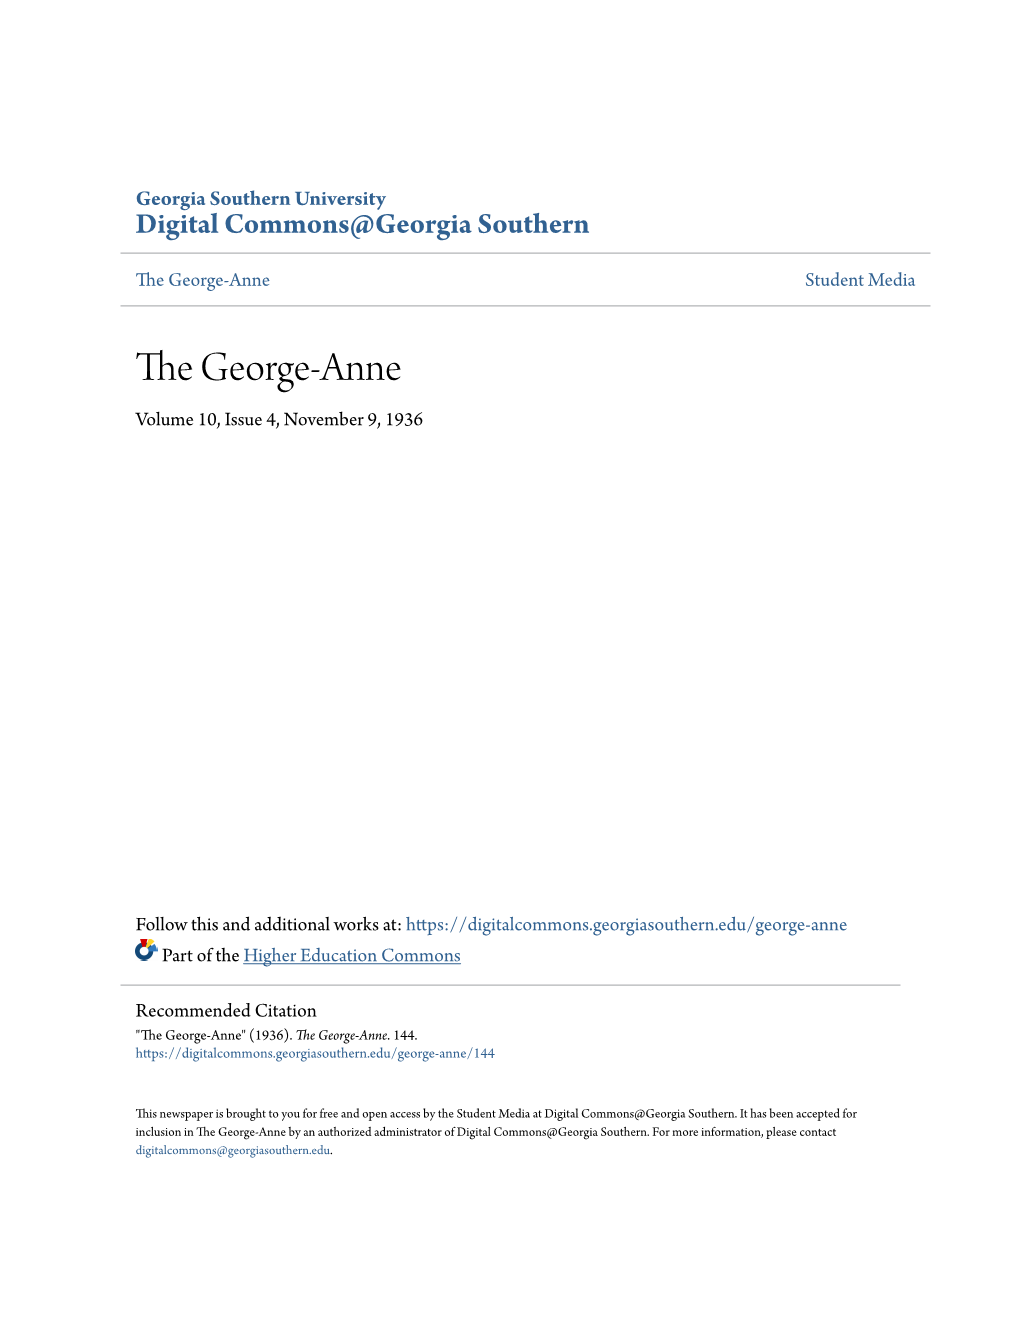 The George-Anne Student Media